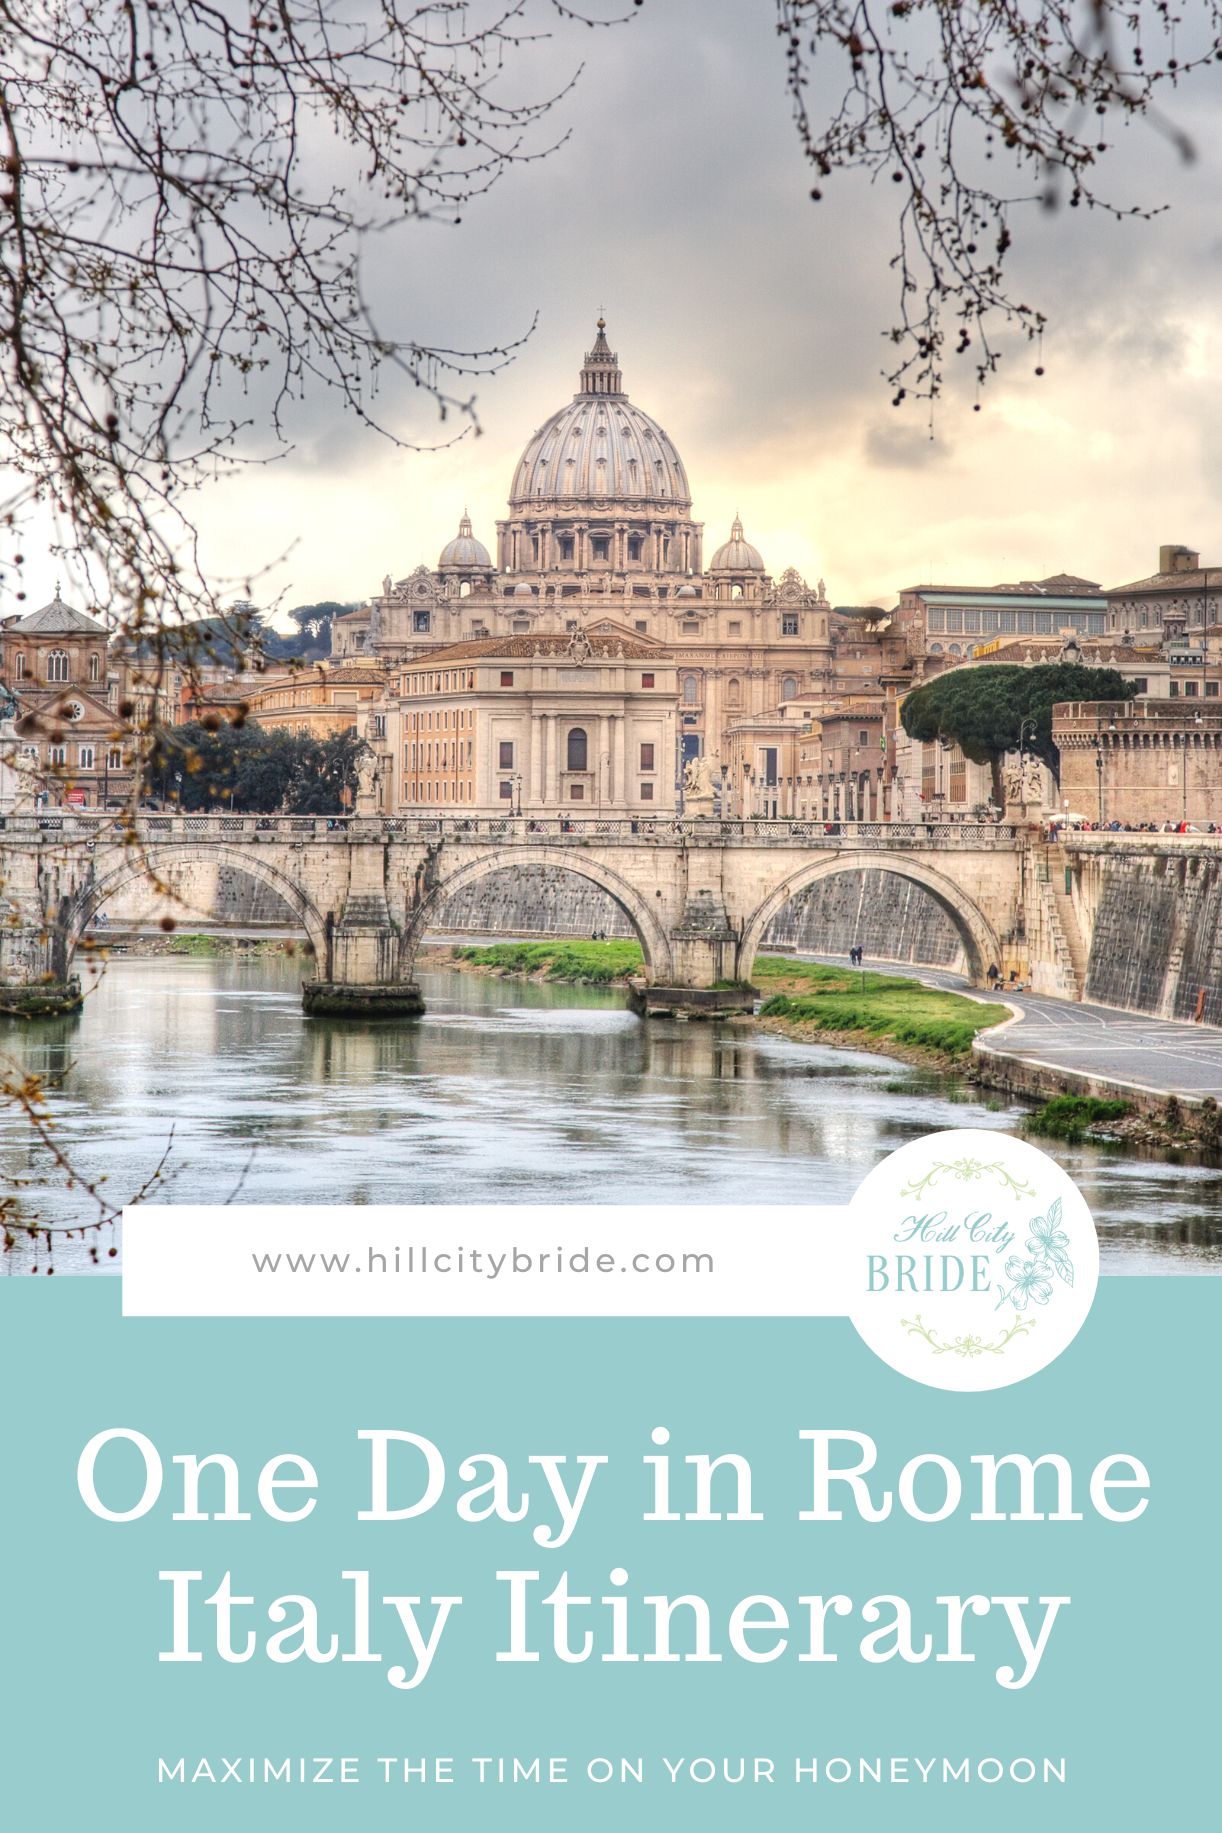 One Day in Rome Itinerary